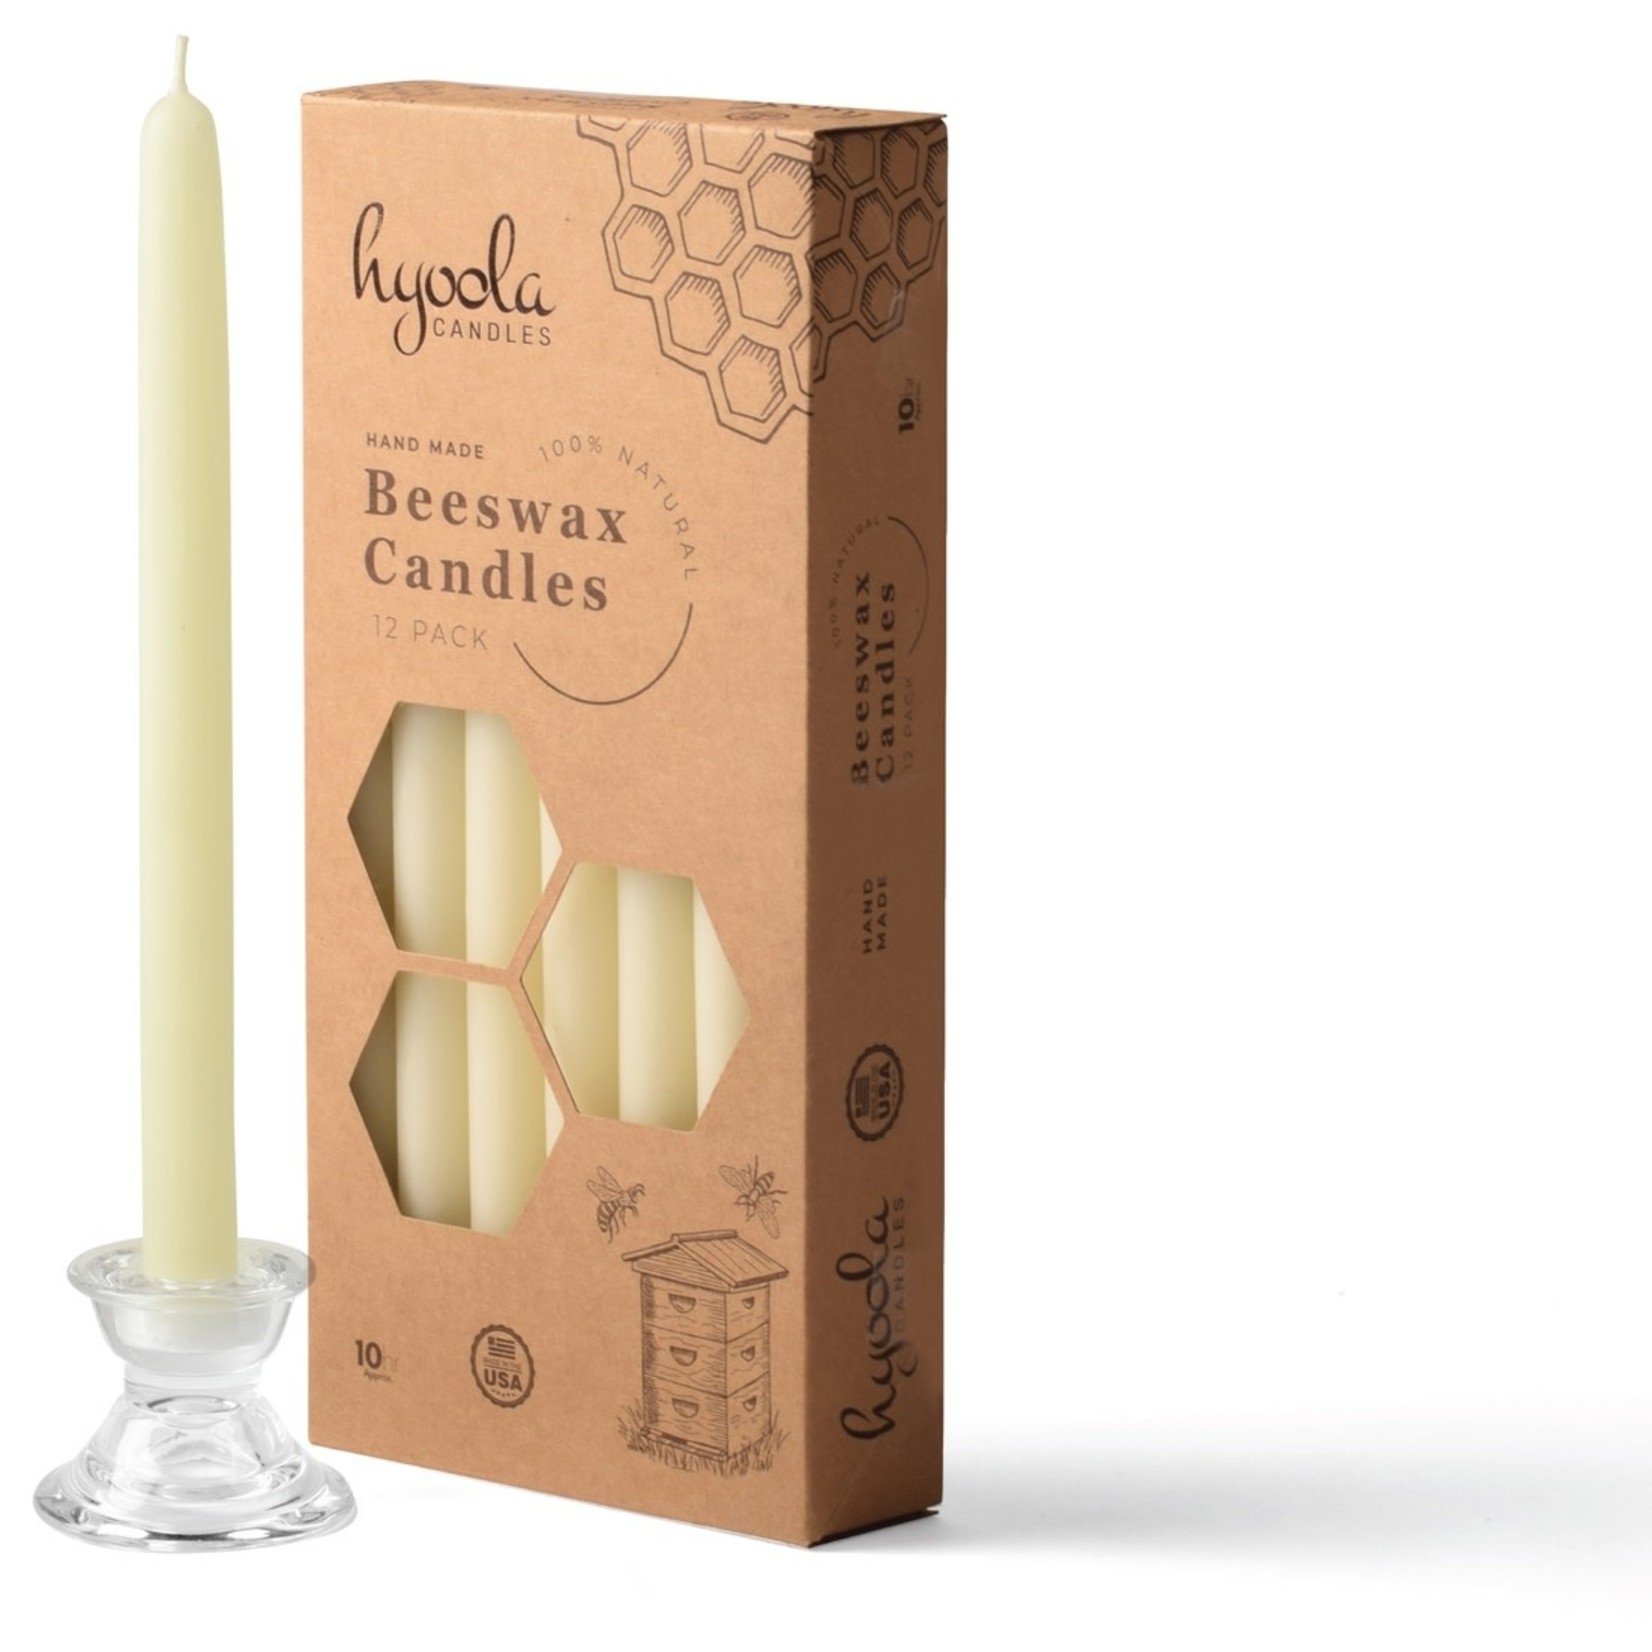 Ner Mitzvah White Beeswax Taper Candles